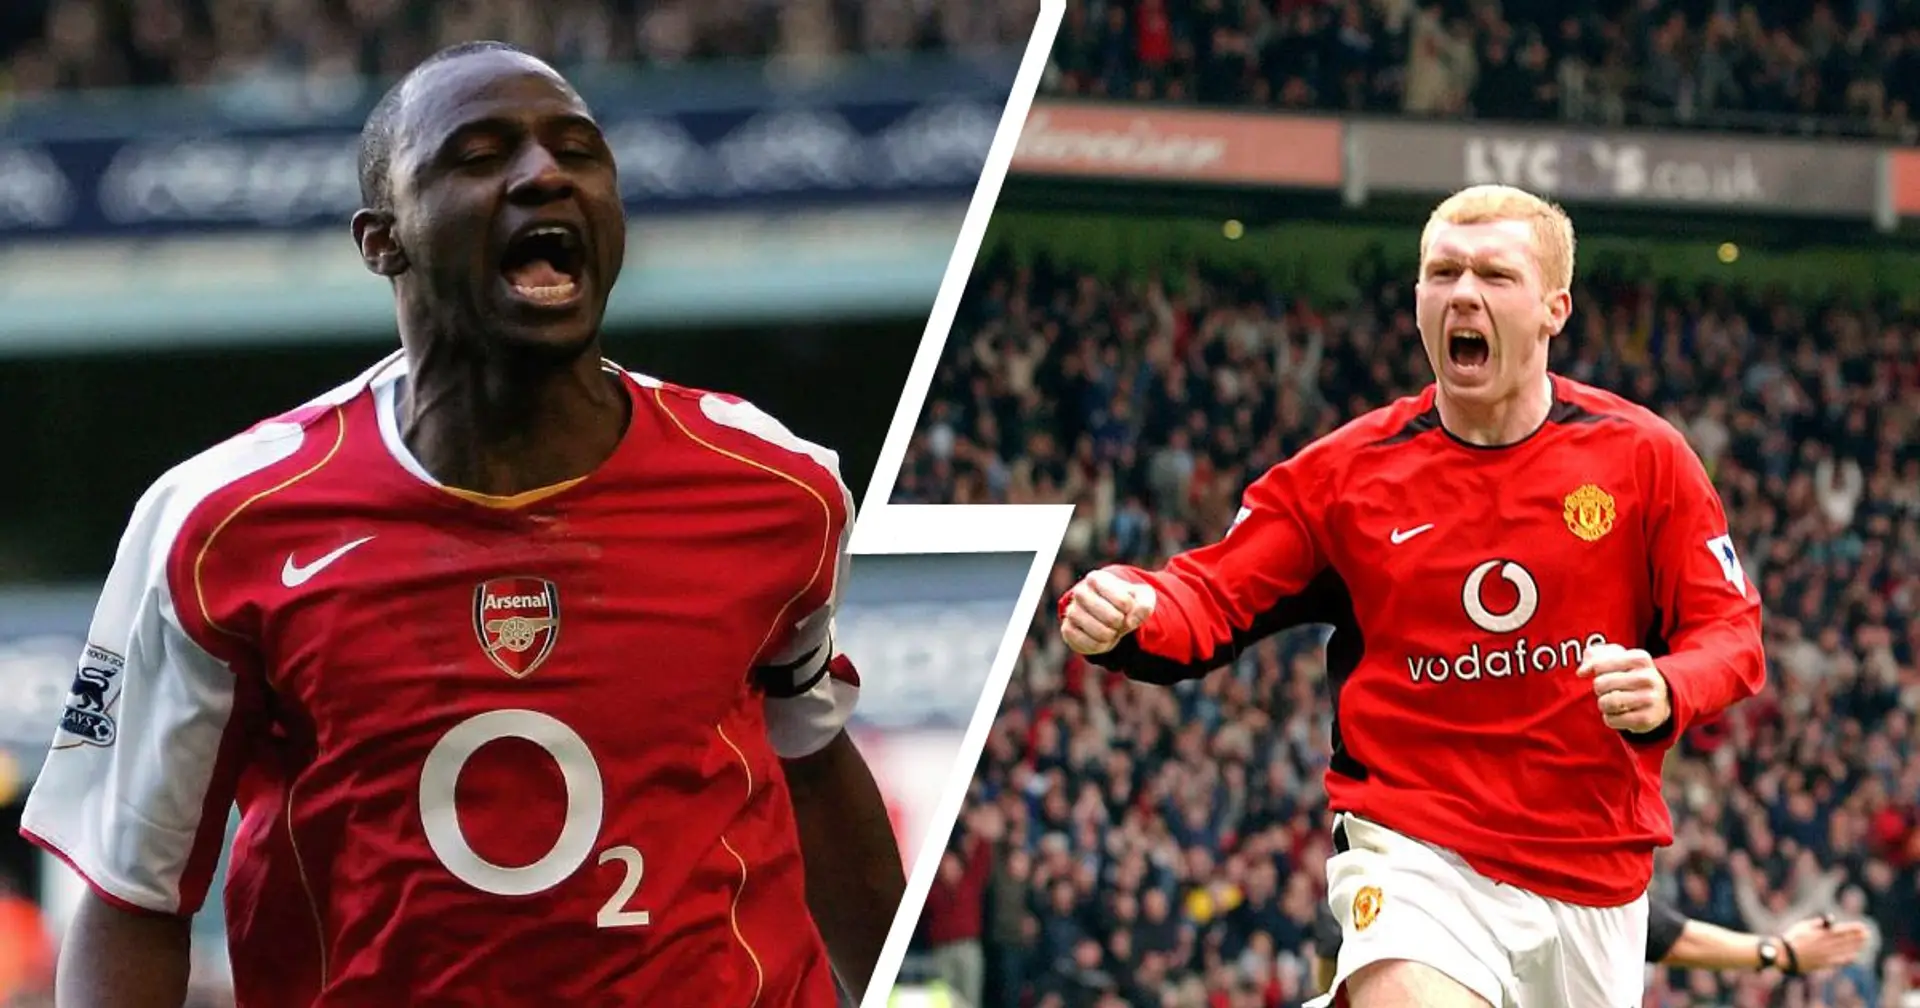 'You think you've got the ball, next minute he nicks the ball over your head': Scholes names Vieira among 2 opponents he 'hated' playing against